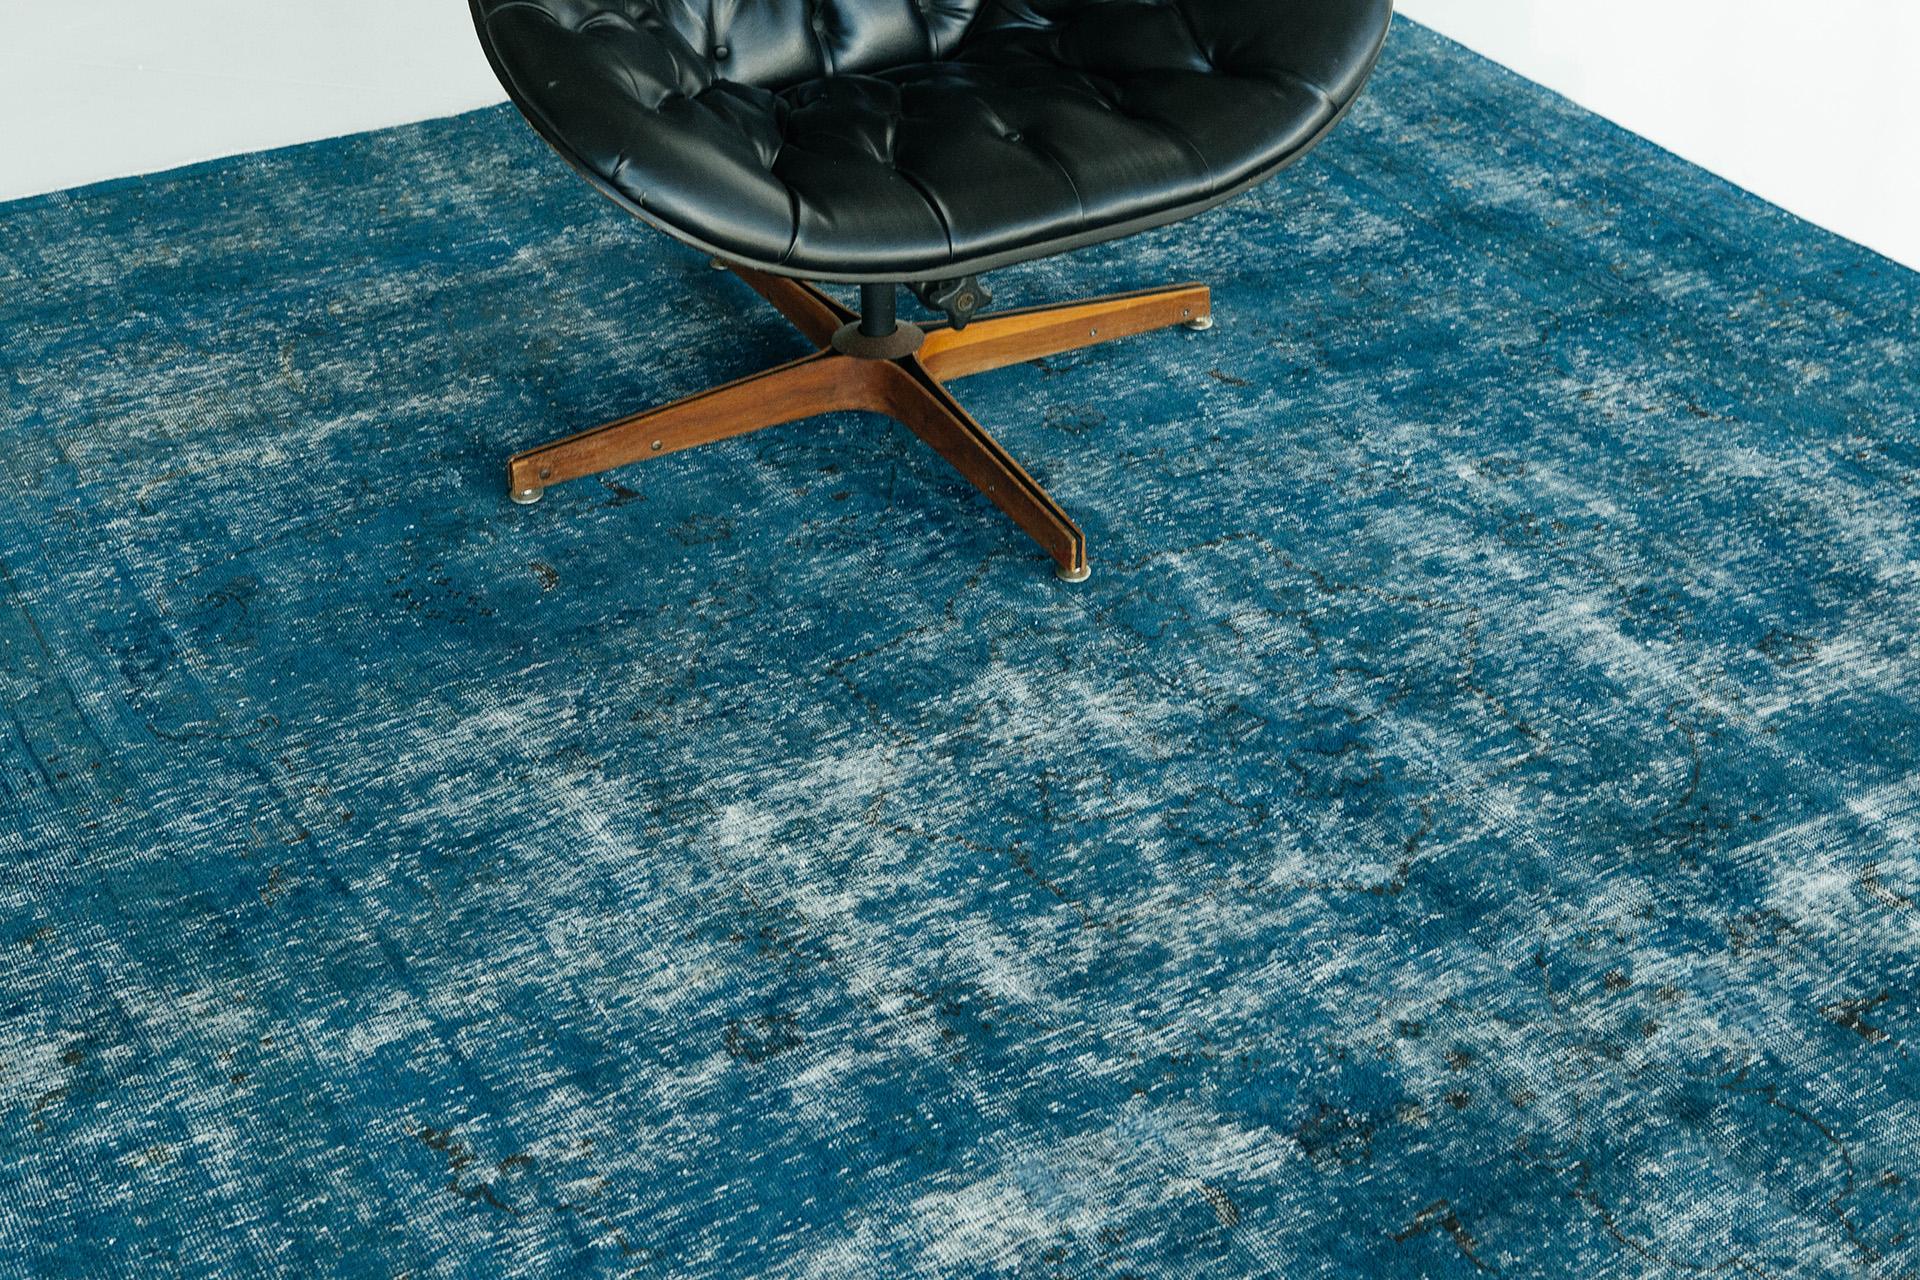 A beautifully overdyed vintage style rug that is deeply saturated in a mesmerizing royal blue tone. This versatile rug will add a regal touch and extraordinary striking appeal to your space. From contemporary or modern to traditional interiors, its